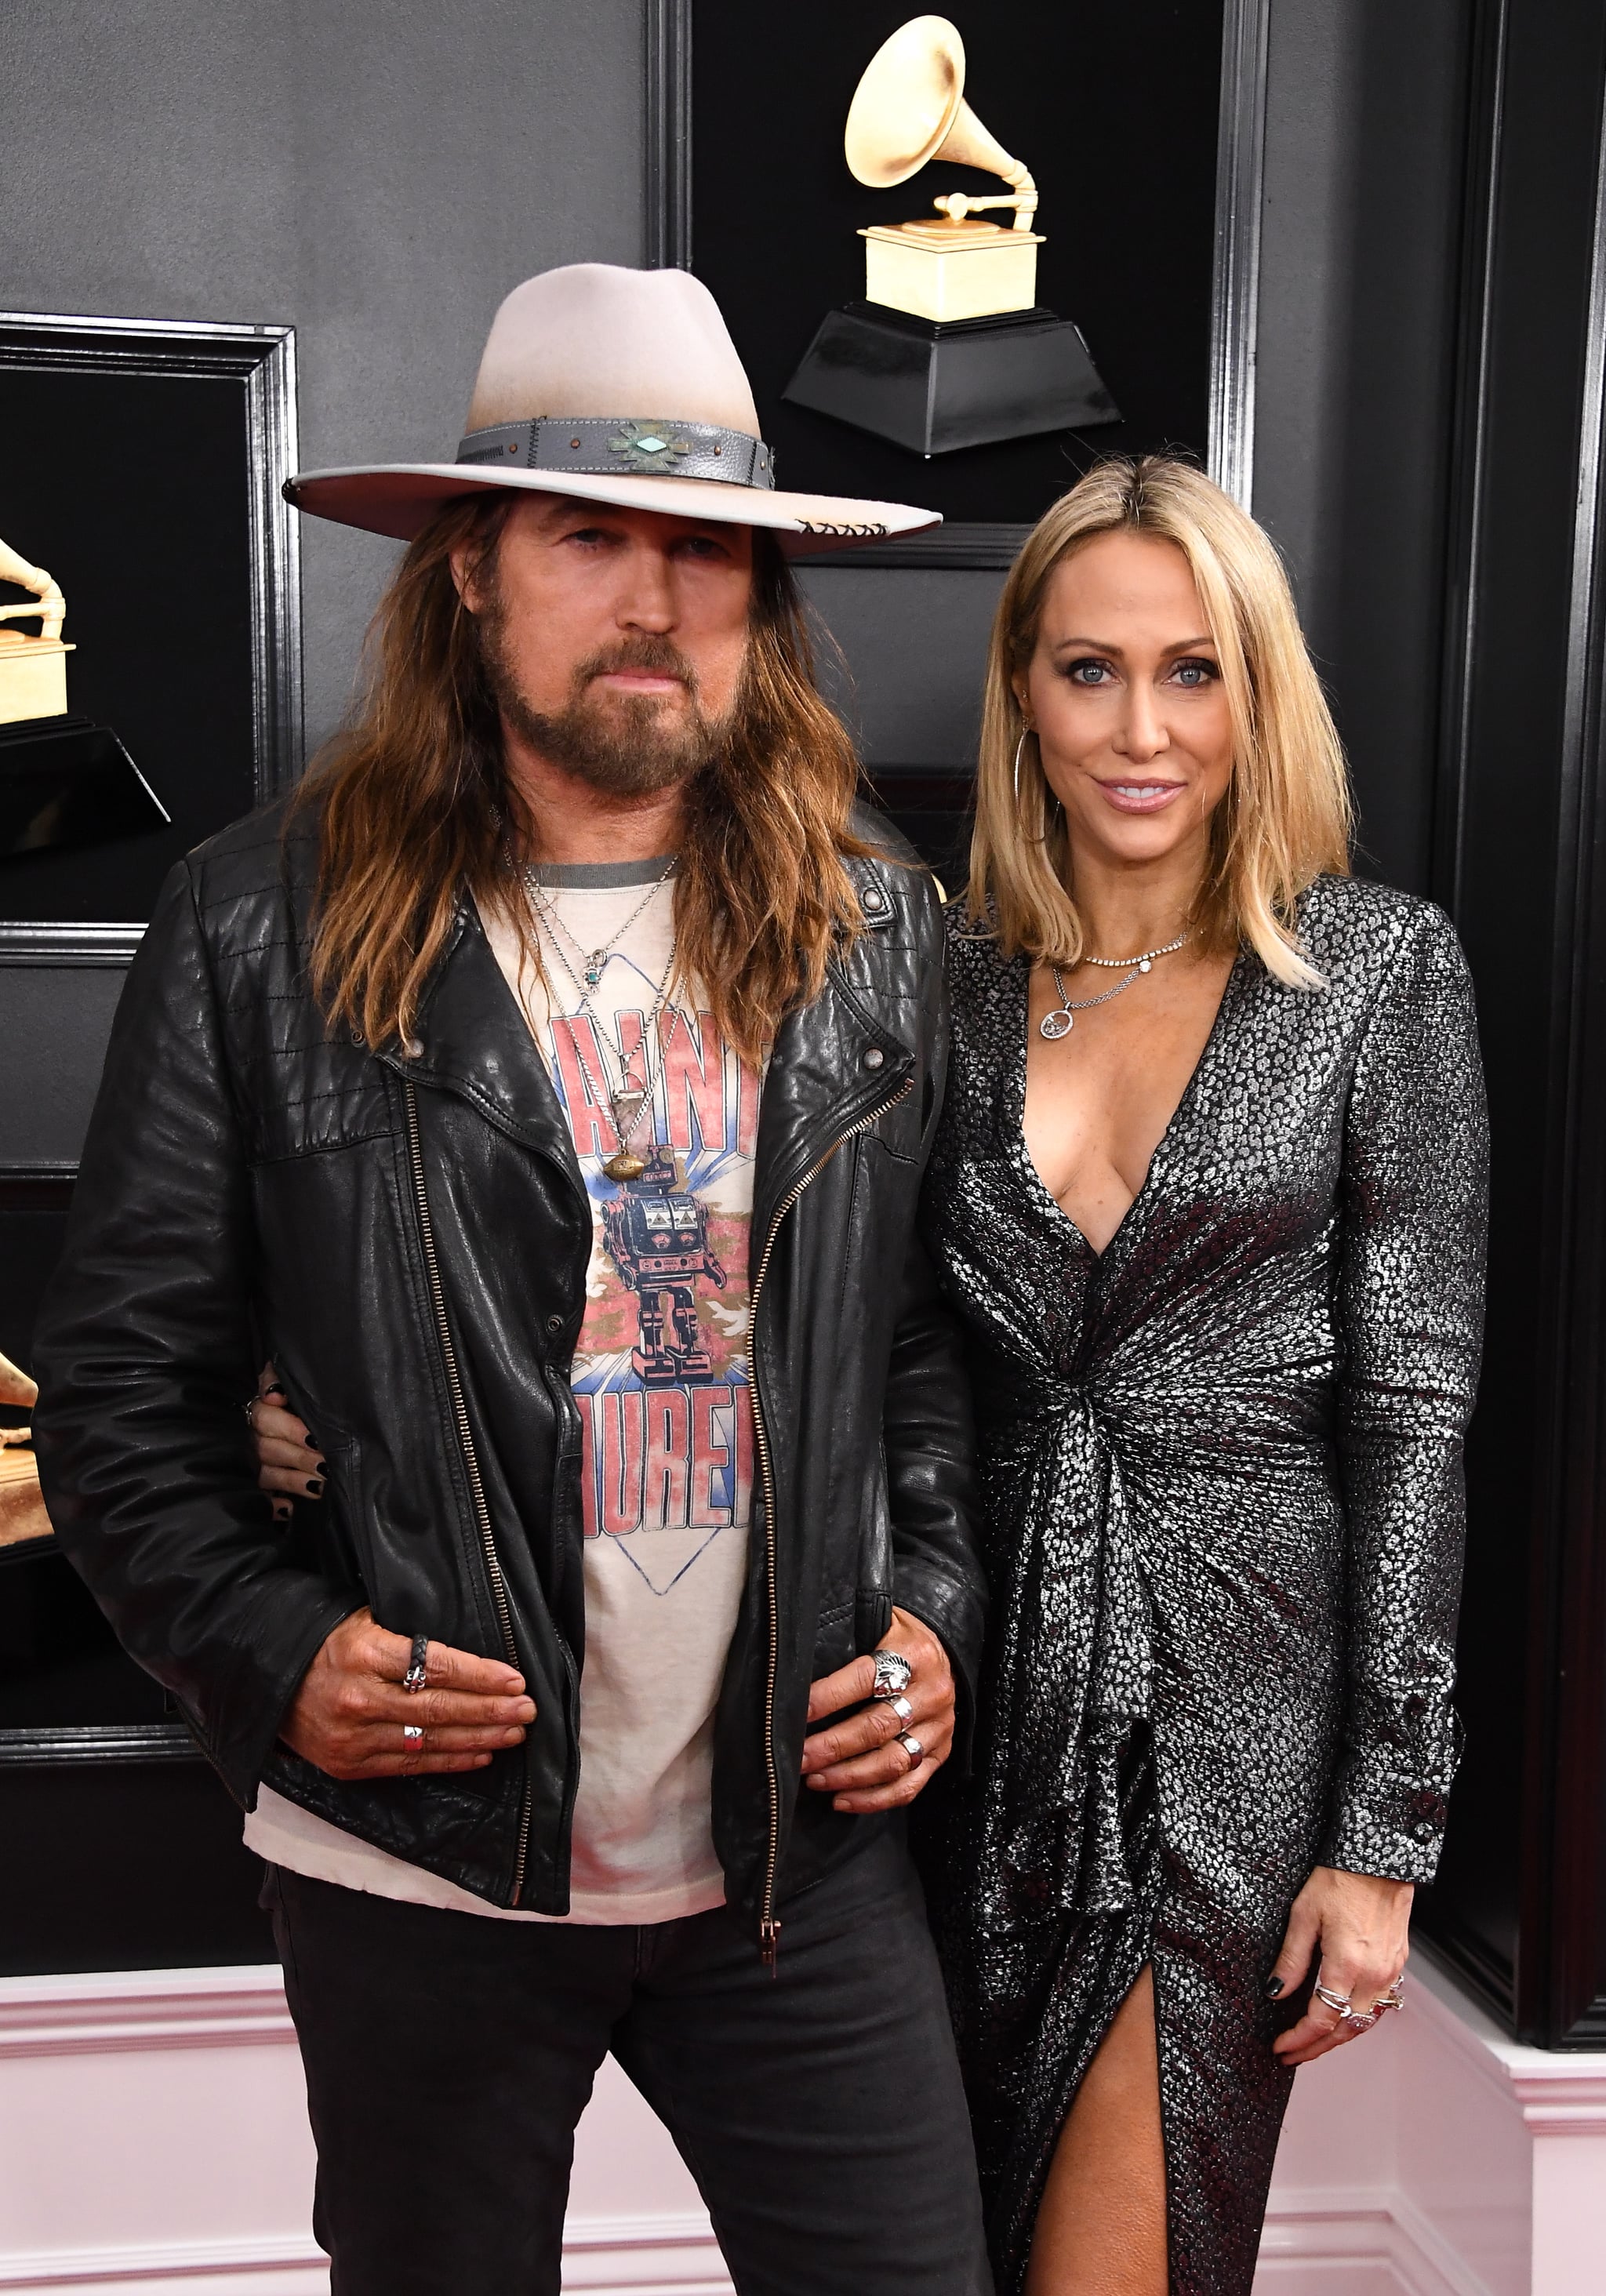 LOS ANGELES, CA - FEBRUARY 10: Billy Ray Cyrus (L) and Tish Cyrus attend the 61st Annual GRAMMY Awards at Staples Center on February 10, 2019 in Los Angeles, California. (Photo by Steve Granitz/WireImage)